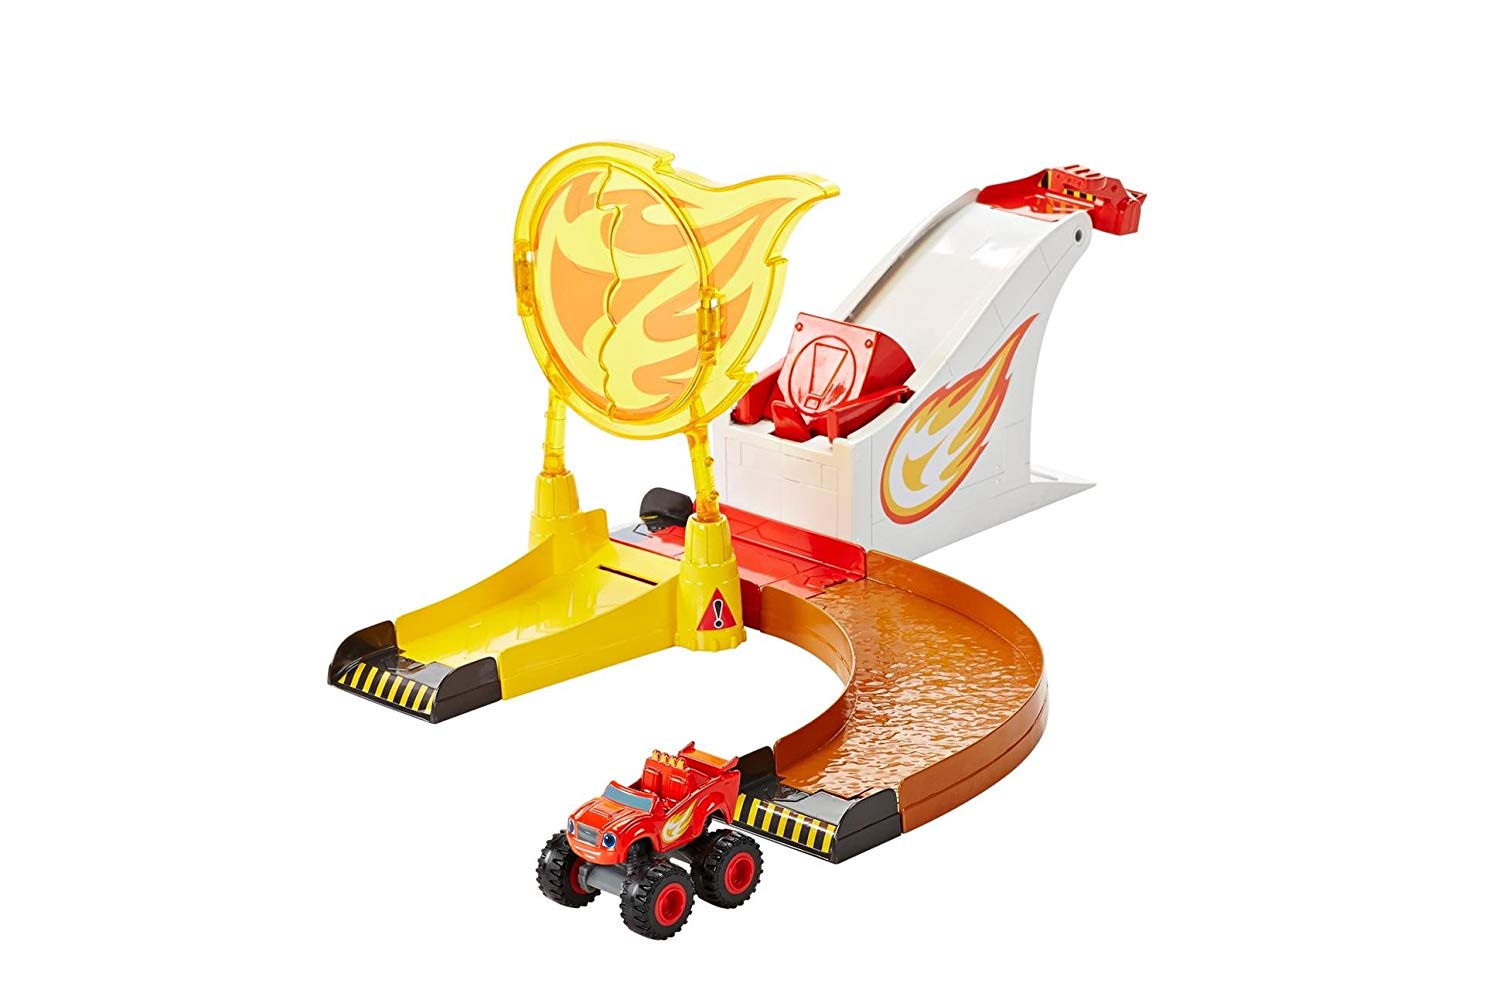 Fisher Price DGK55 Blaze and the Monster Machines Flame Jumping Play Set